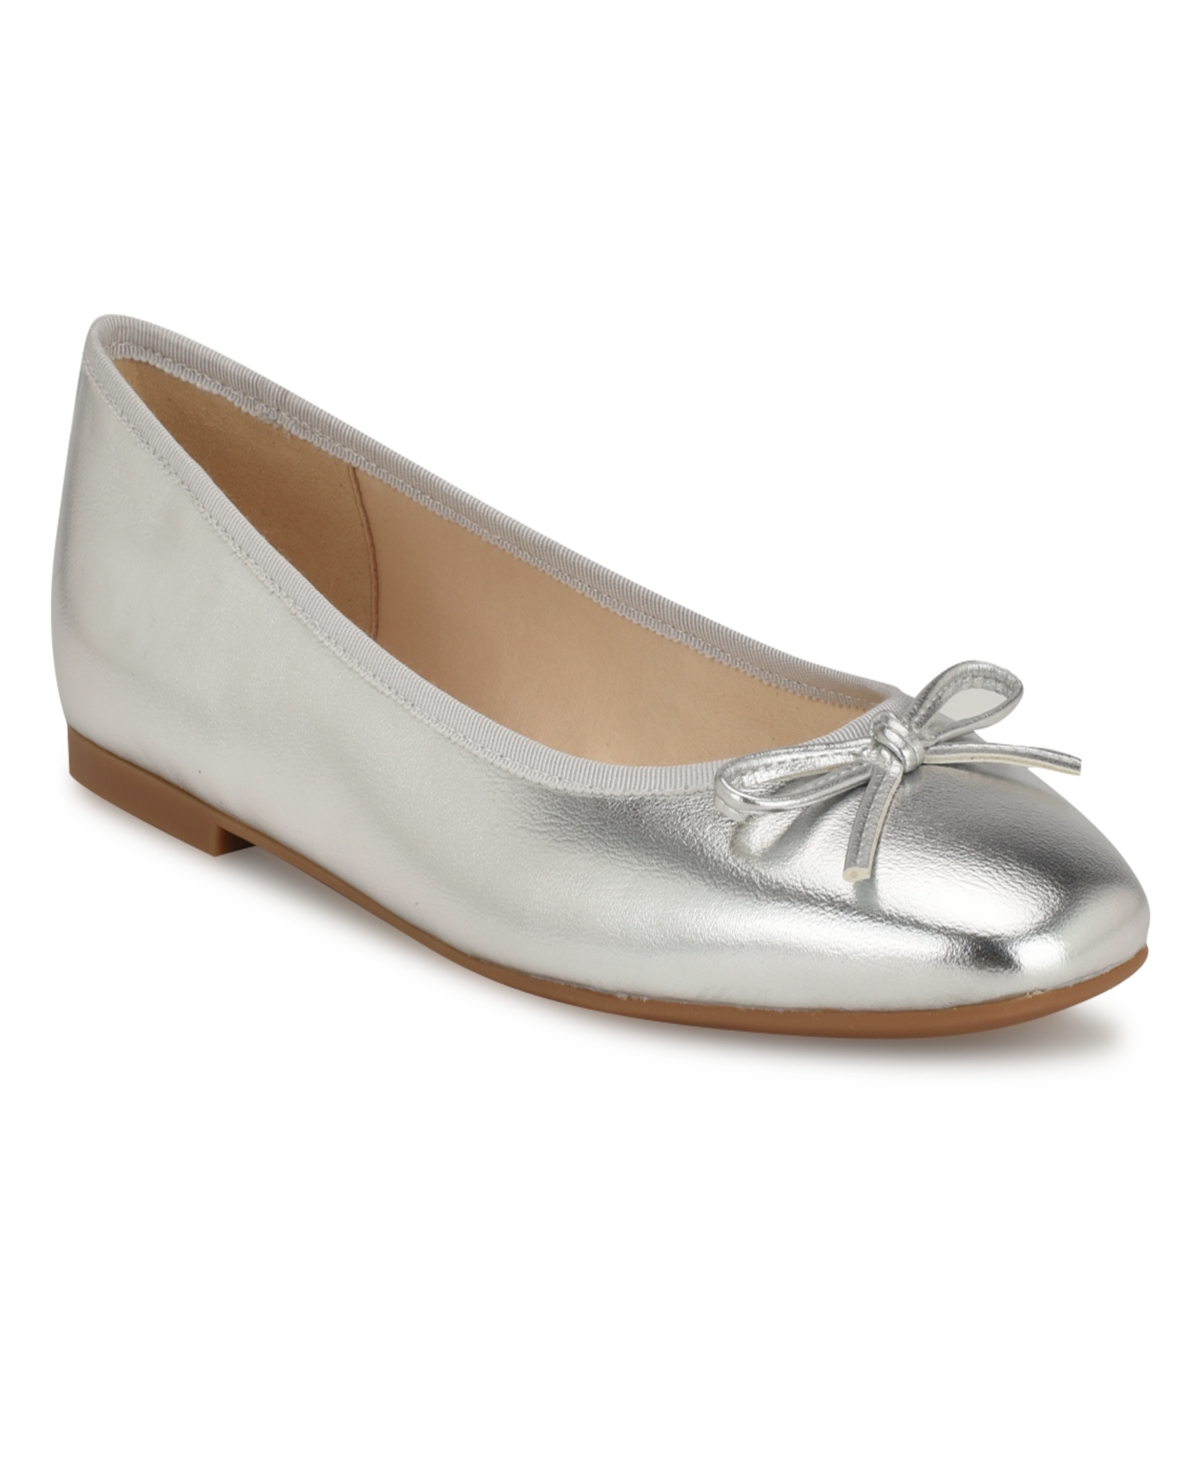 Nine West Women's Tootsy Square Toe Slip-on Ballet Dress Flats In Silver - Faux Leather